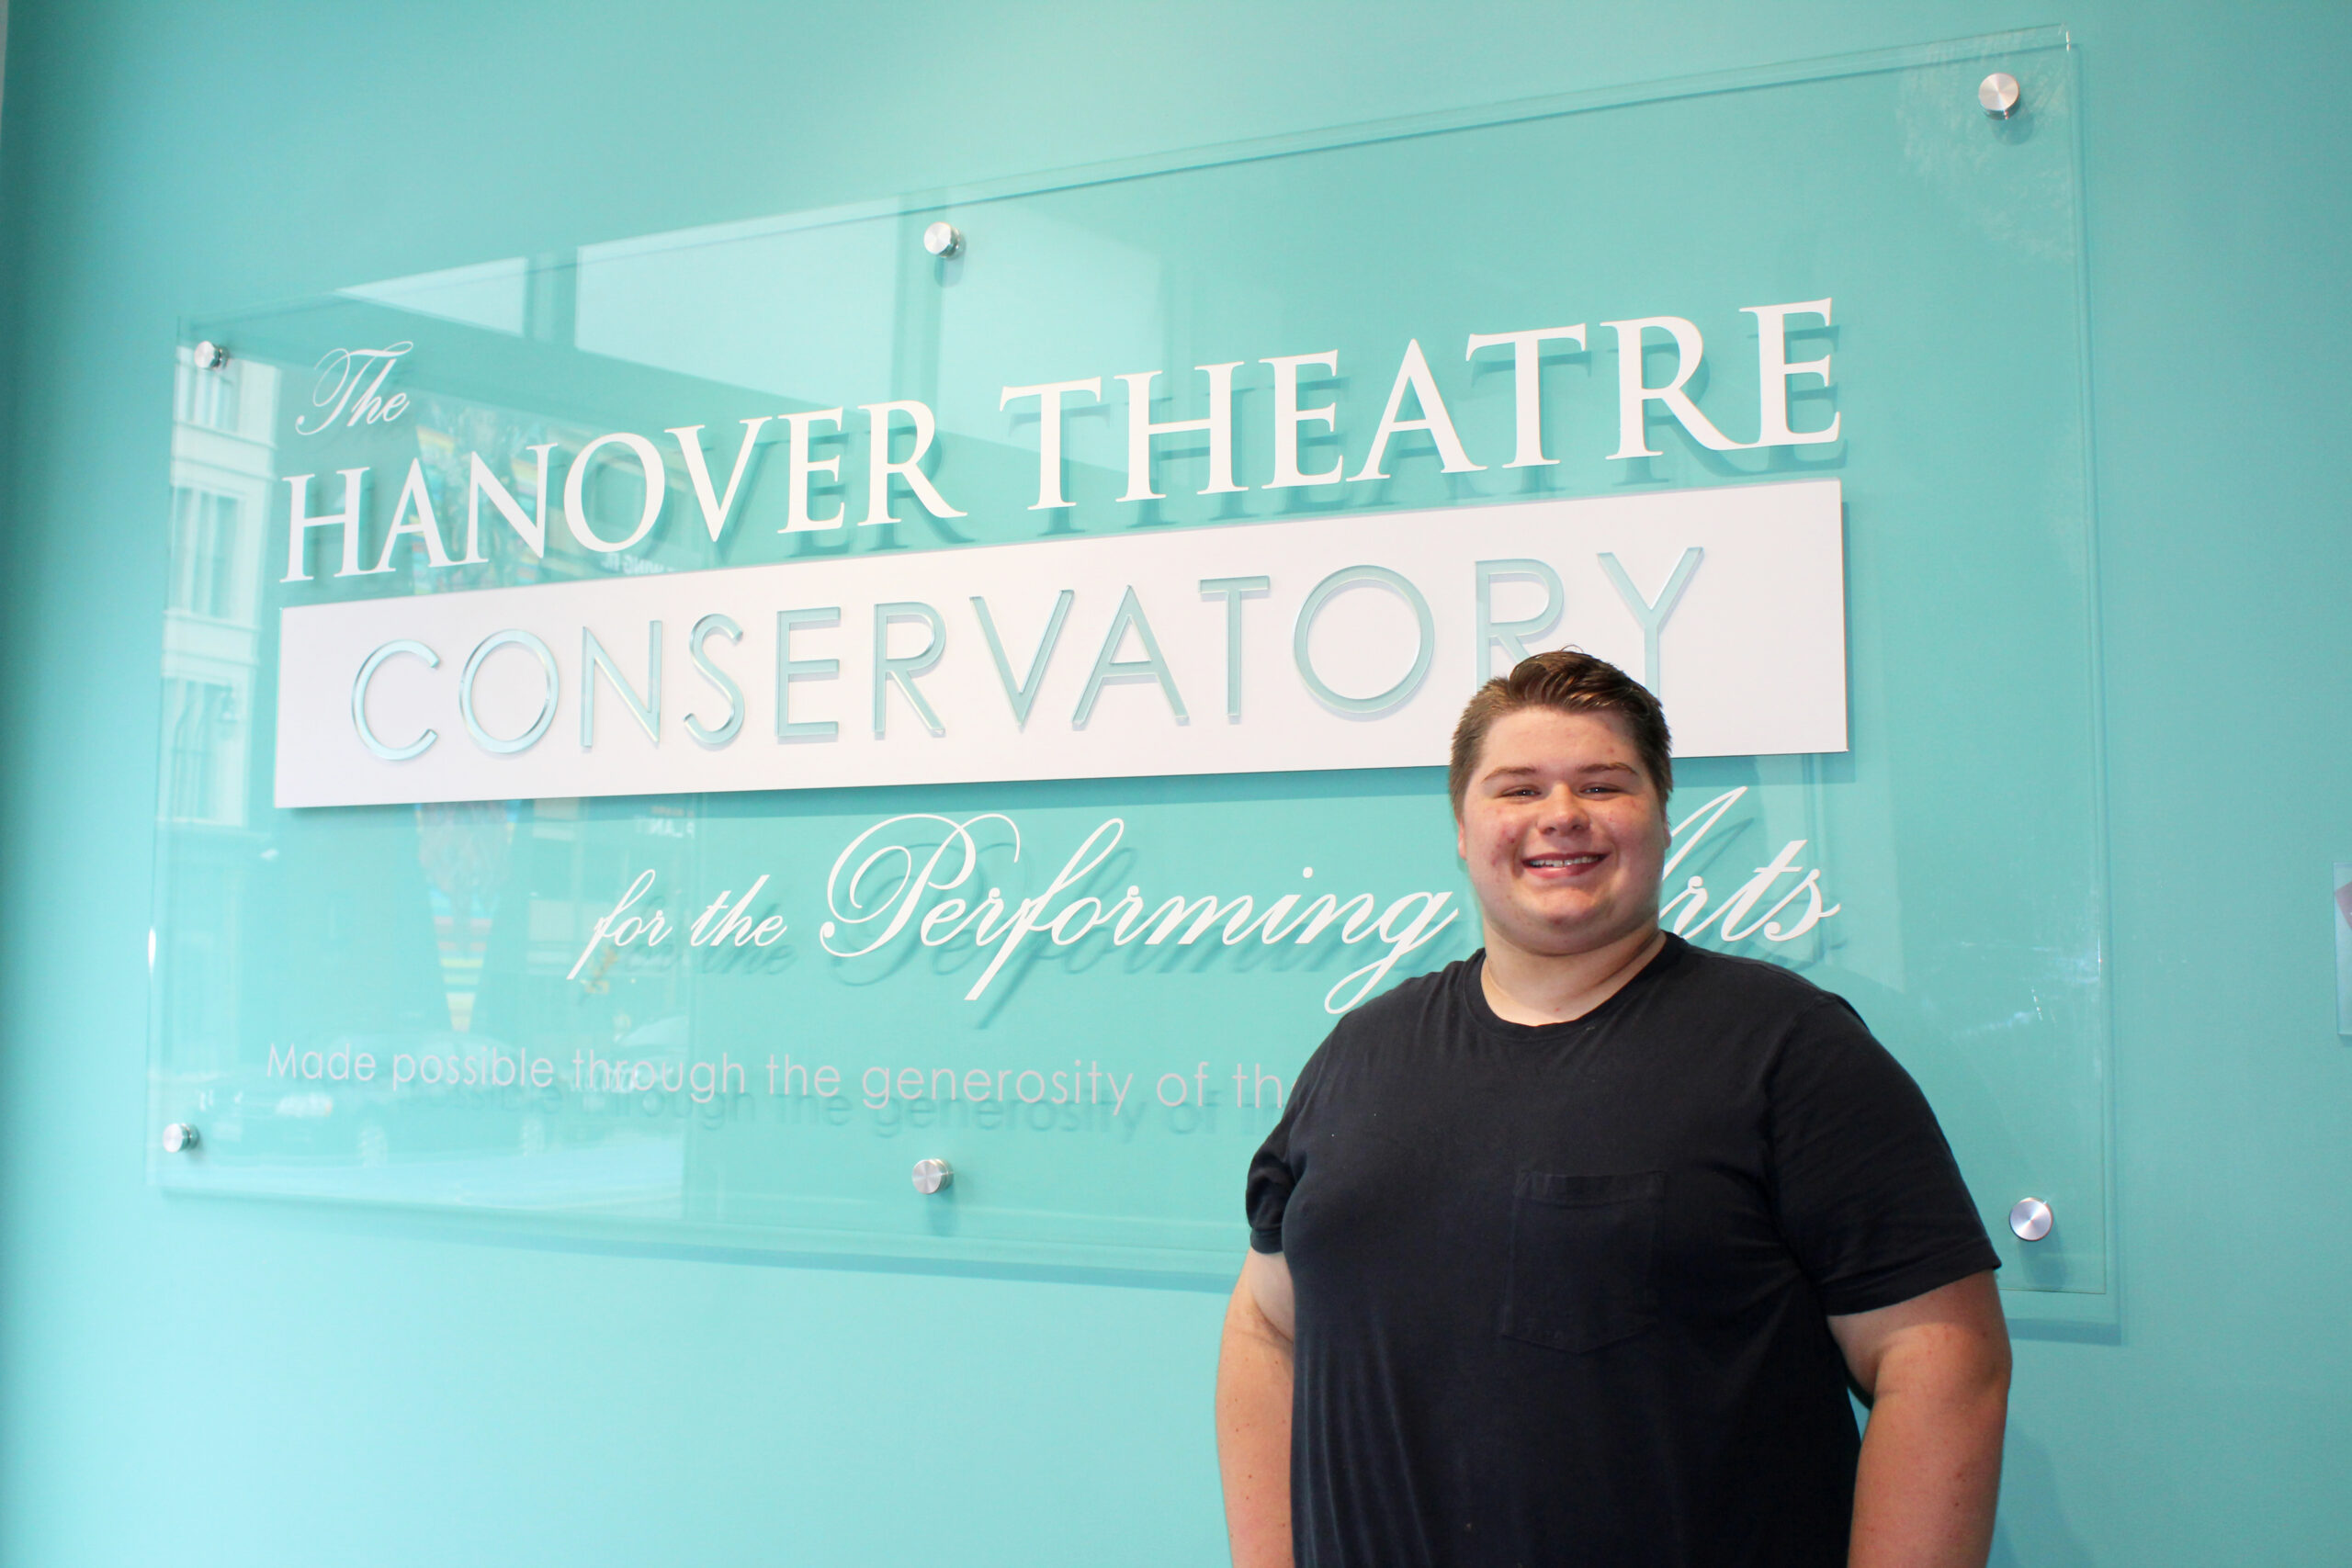 Hopkinton teen to appear in Hanover Theatre play this weekend